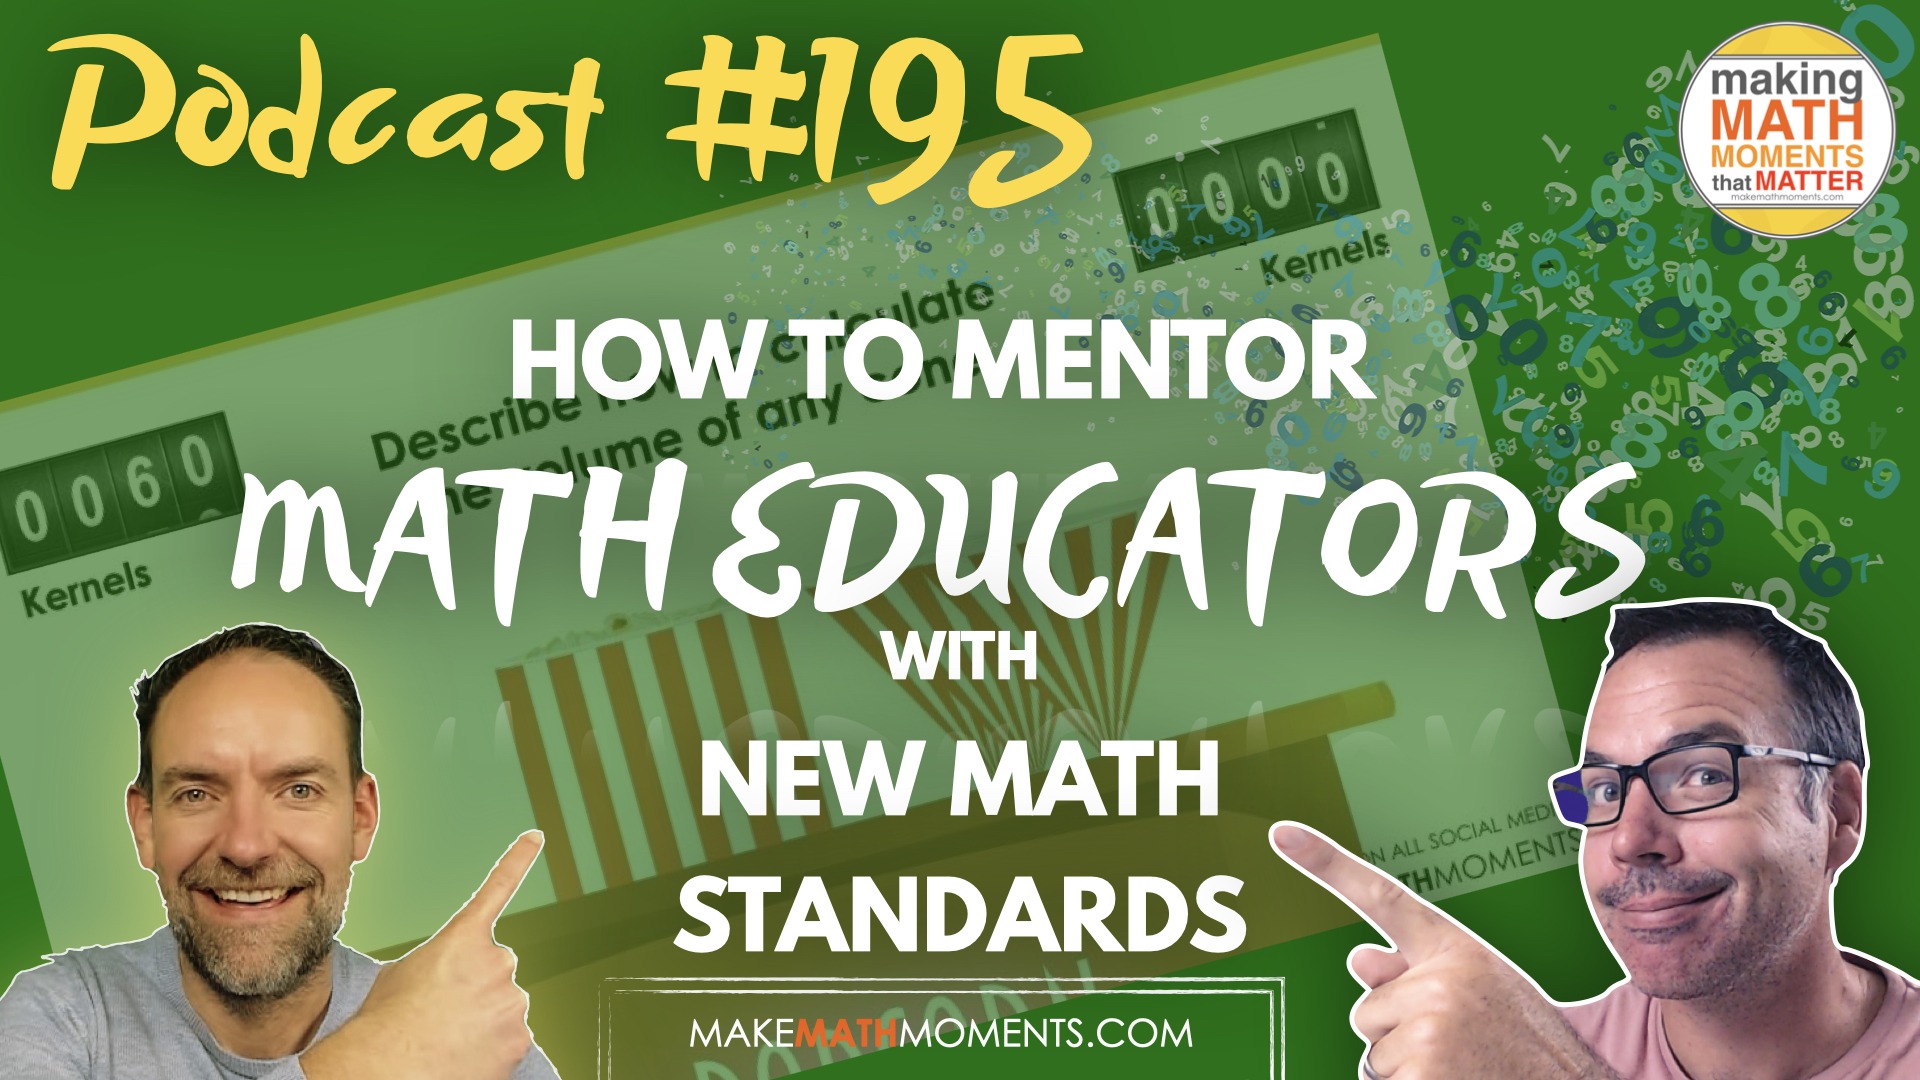 Episode #195: How To Mentor Educators With New Math Standards – A Math Mentoring Moment